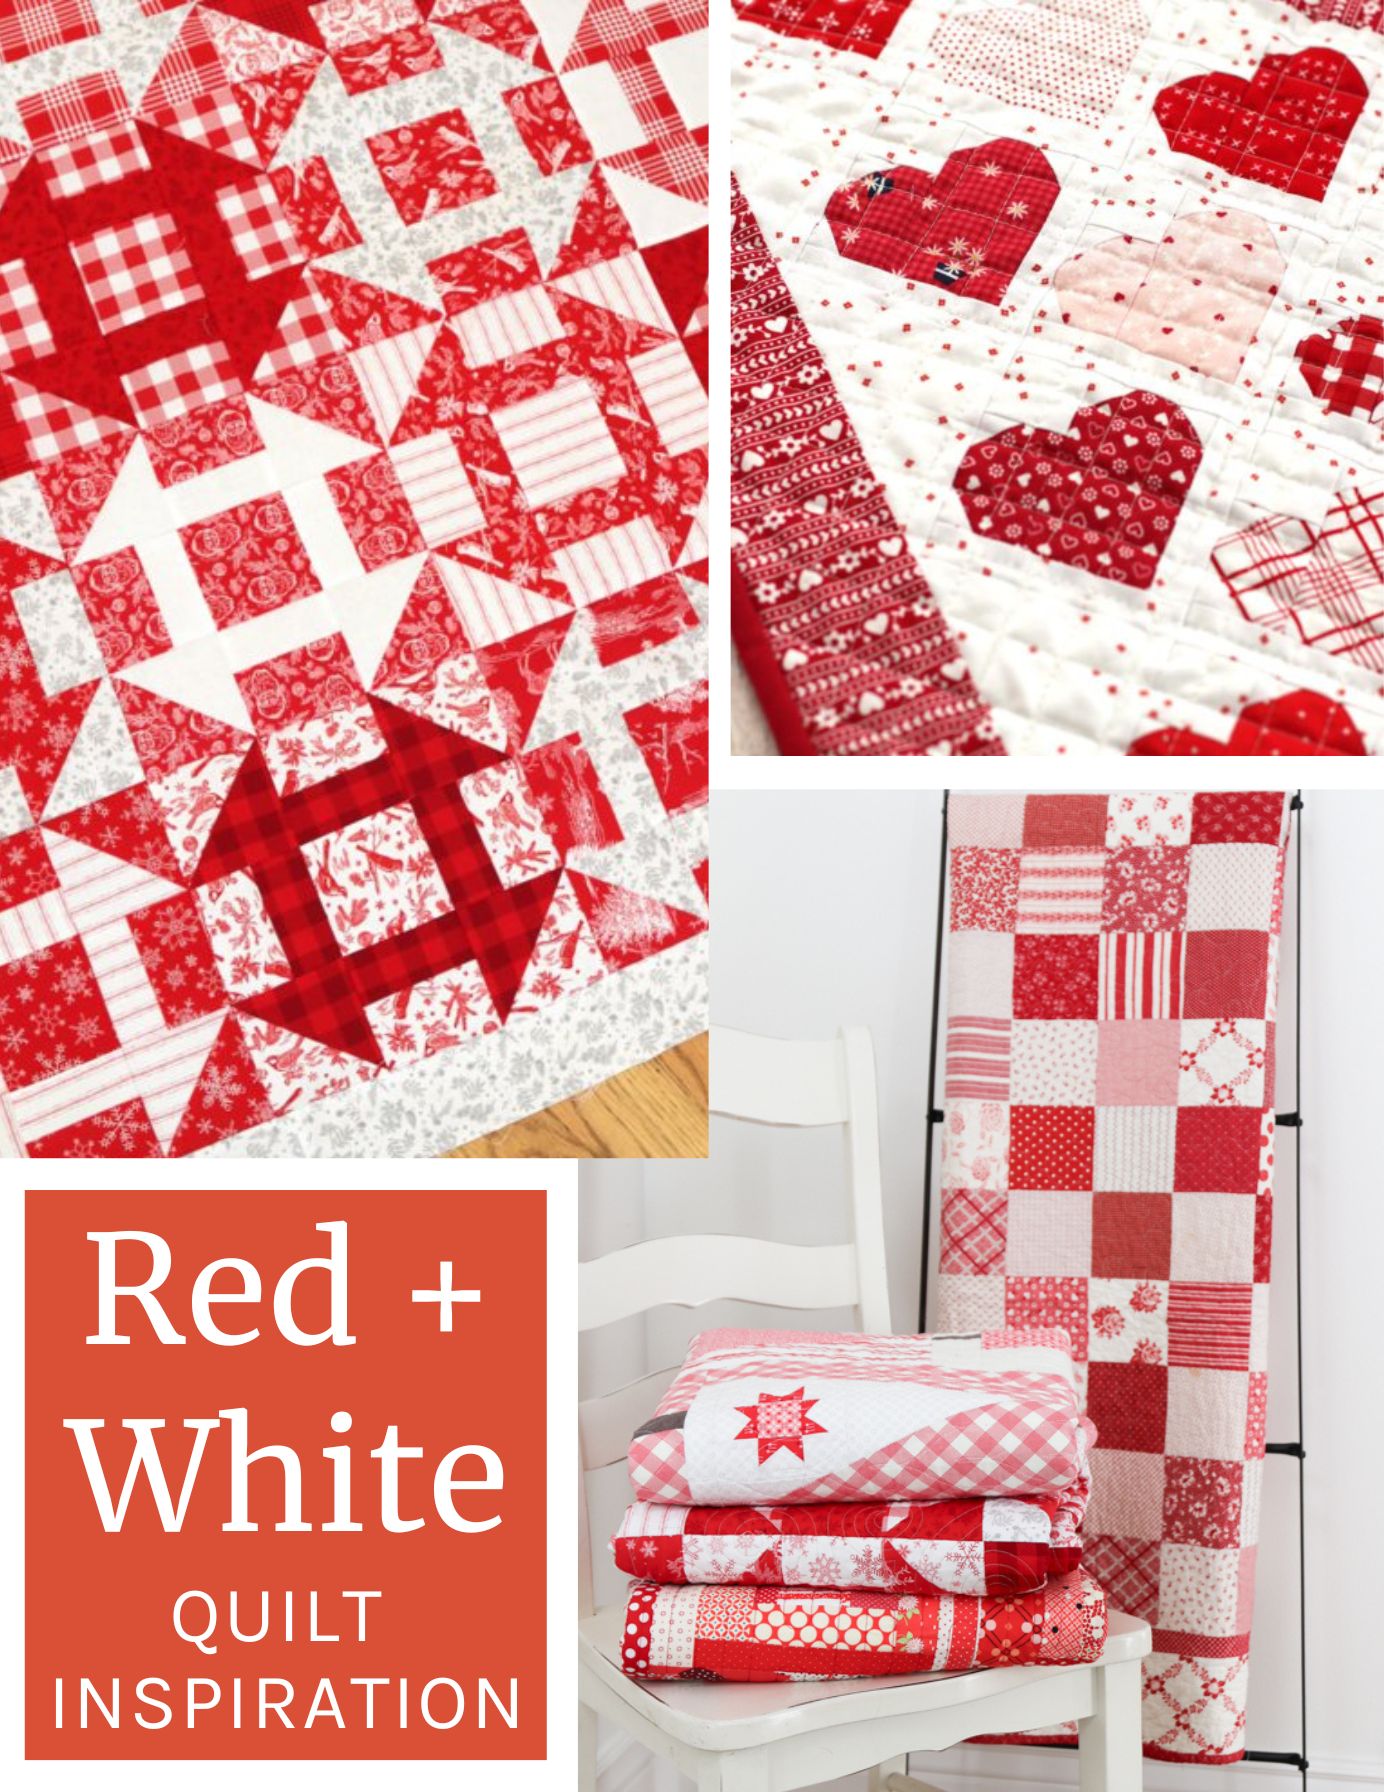 Red and White Quilt patterns and Inspiration put together by Amy Smart, Diary of a Quilter